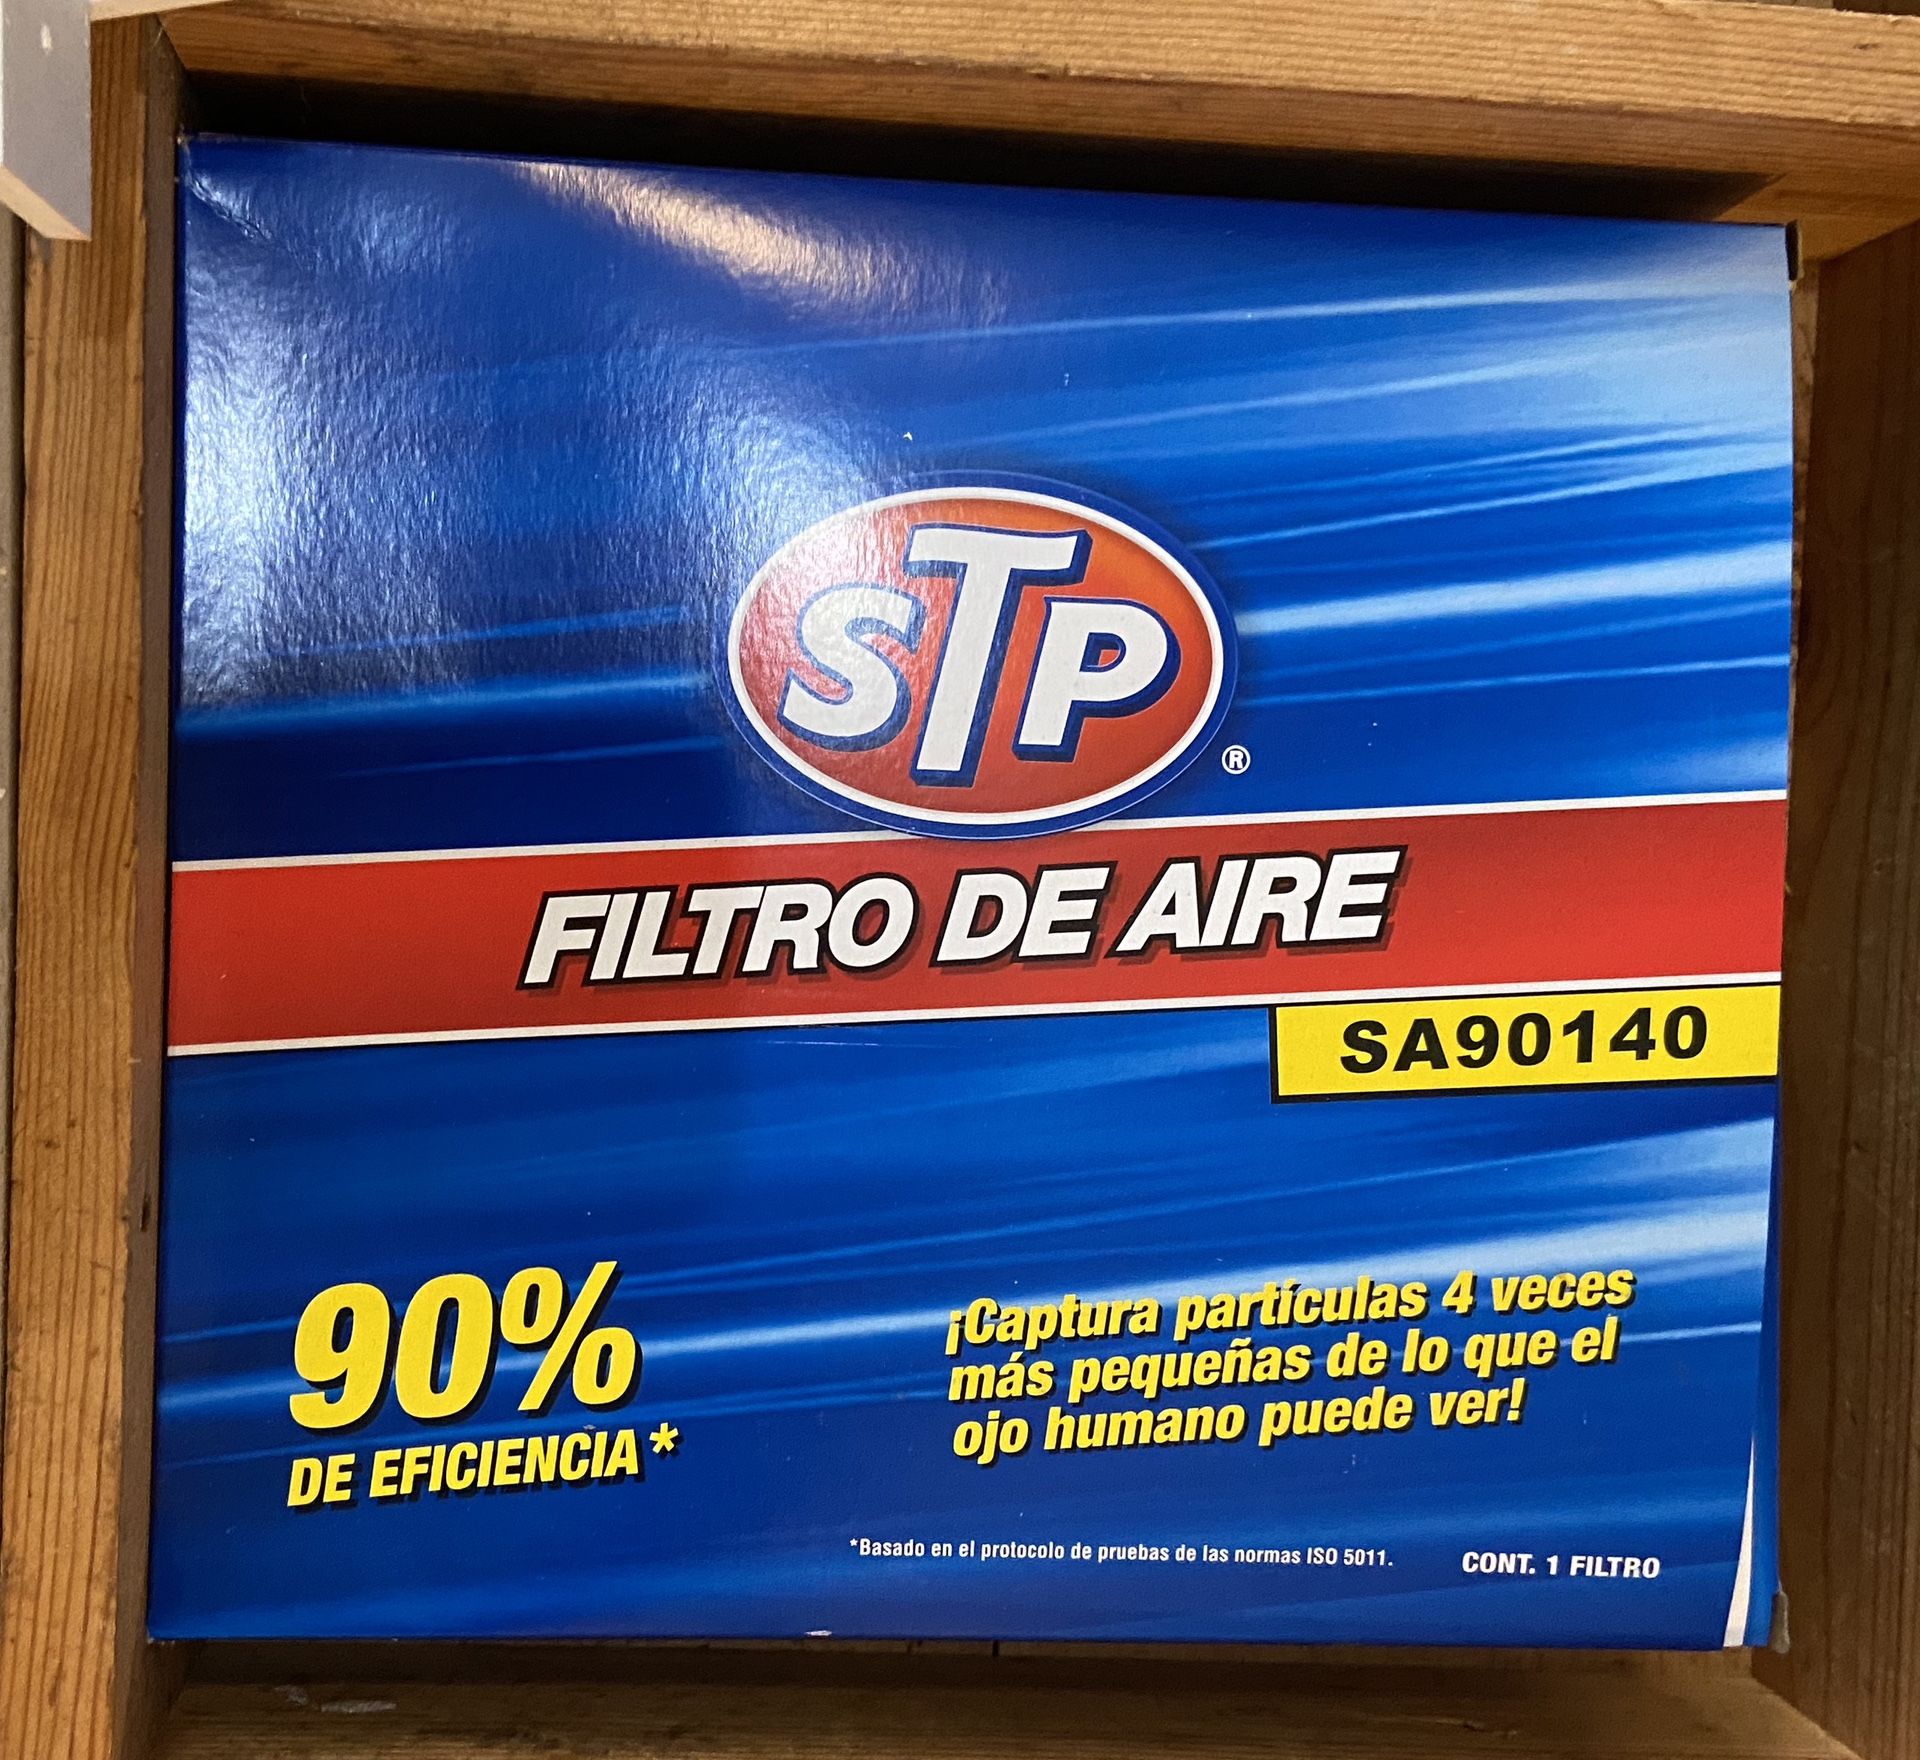 STP Air Filter Brand New In Box